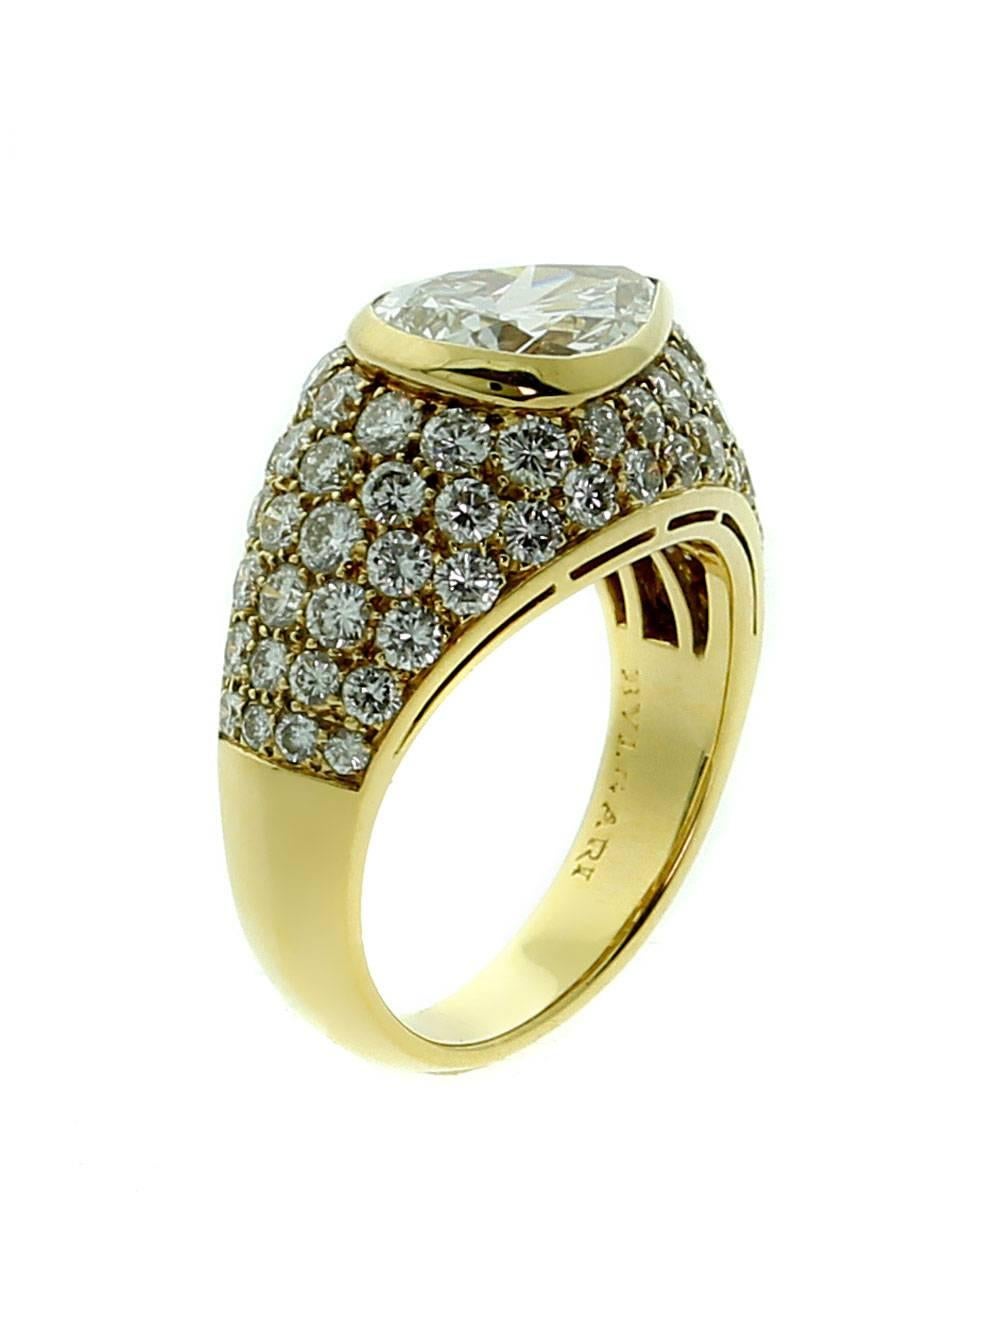 A fabulous authentic Bulgari diamond cocktail ring showcasing a 1.73ct pear shape diamond surrounded by an abundance of round brilliant cut diamonds set in 18k yellow gold.

Size: US 5 ( Resizeable)
Dimensions: 11mm wide (.43″ wide)

Inventory